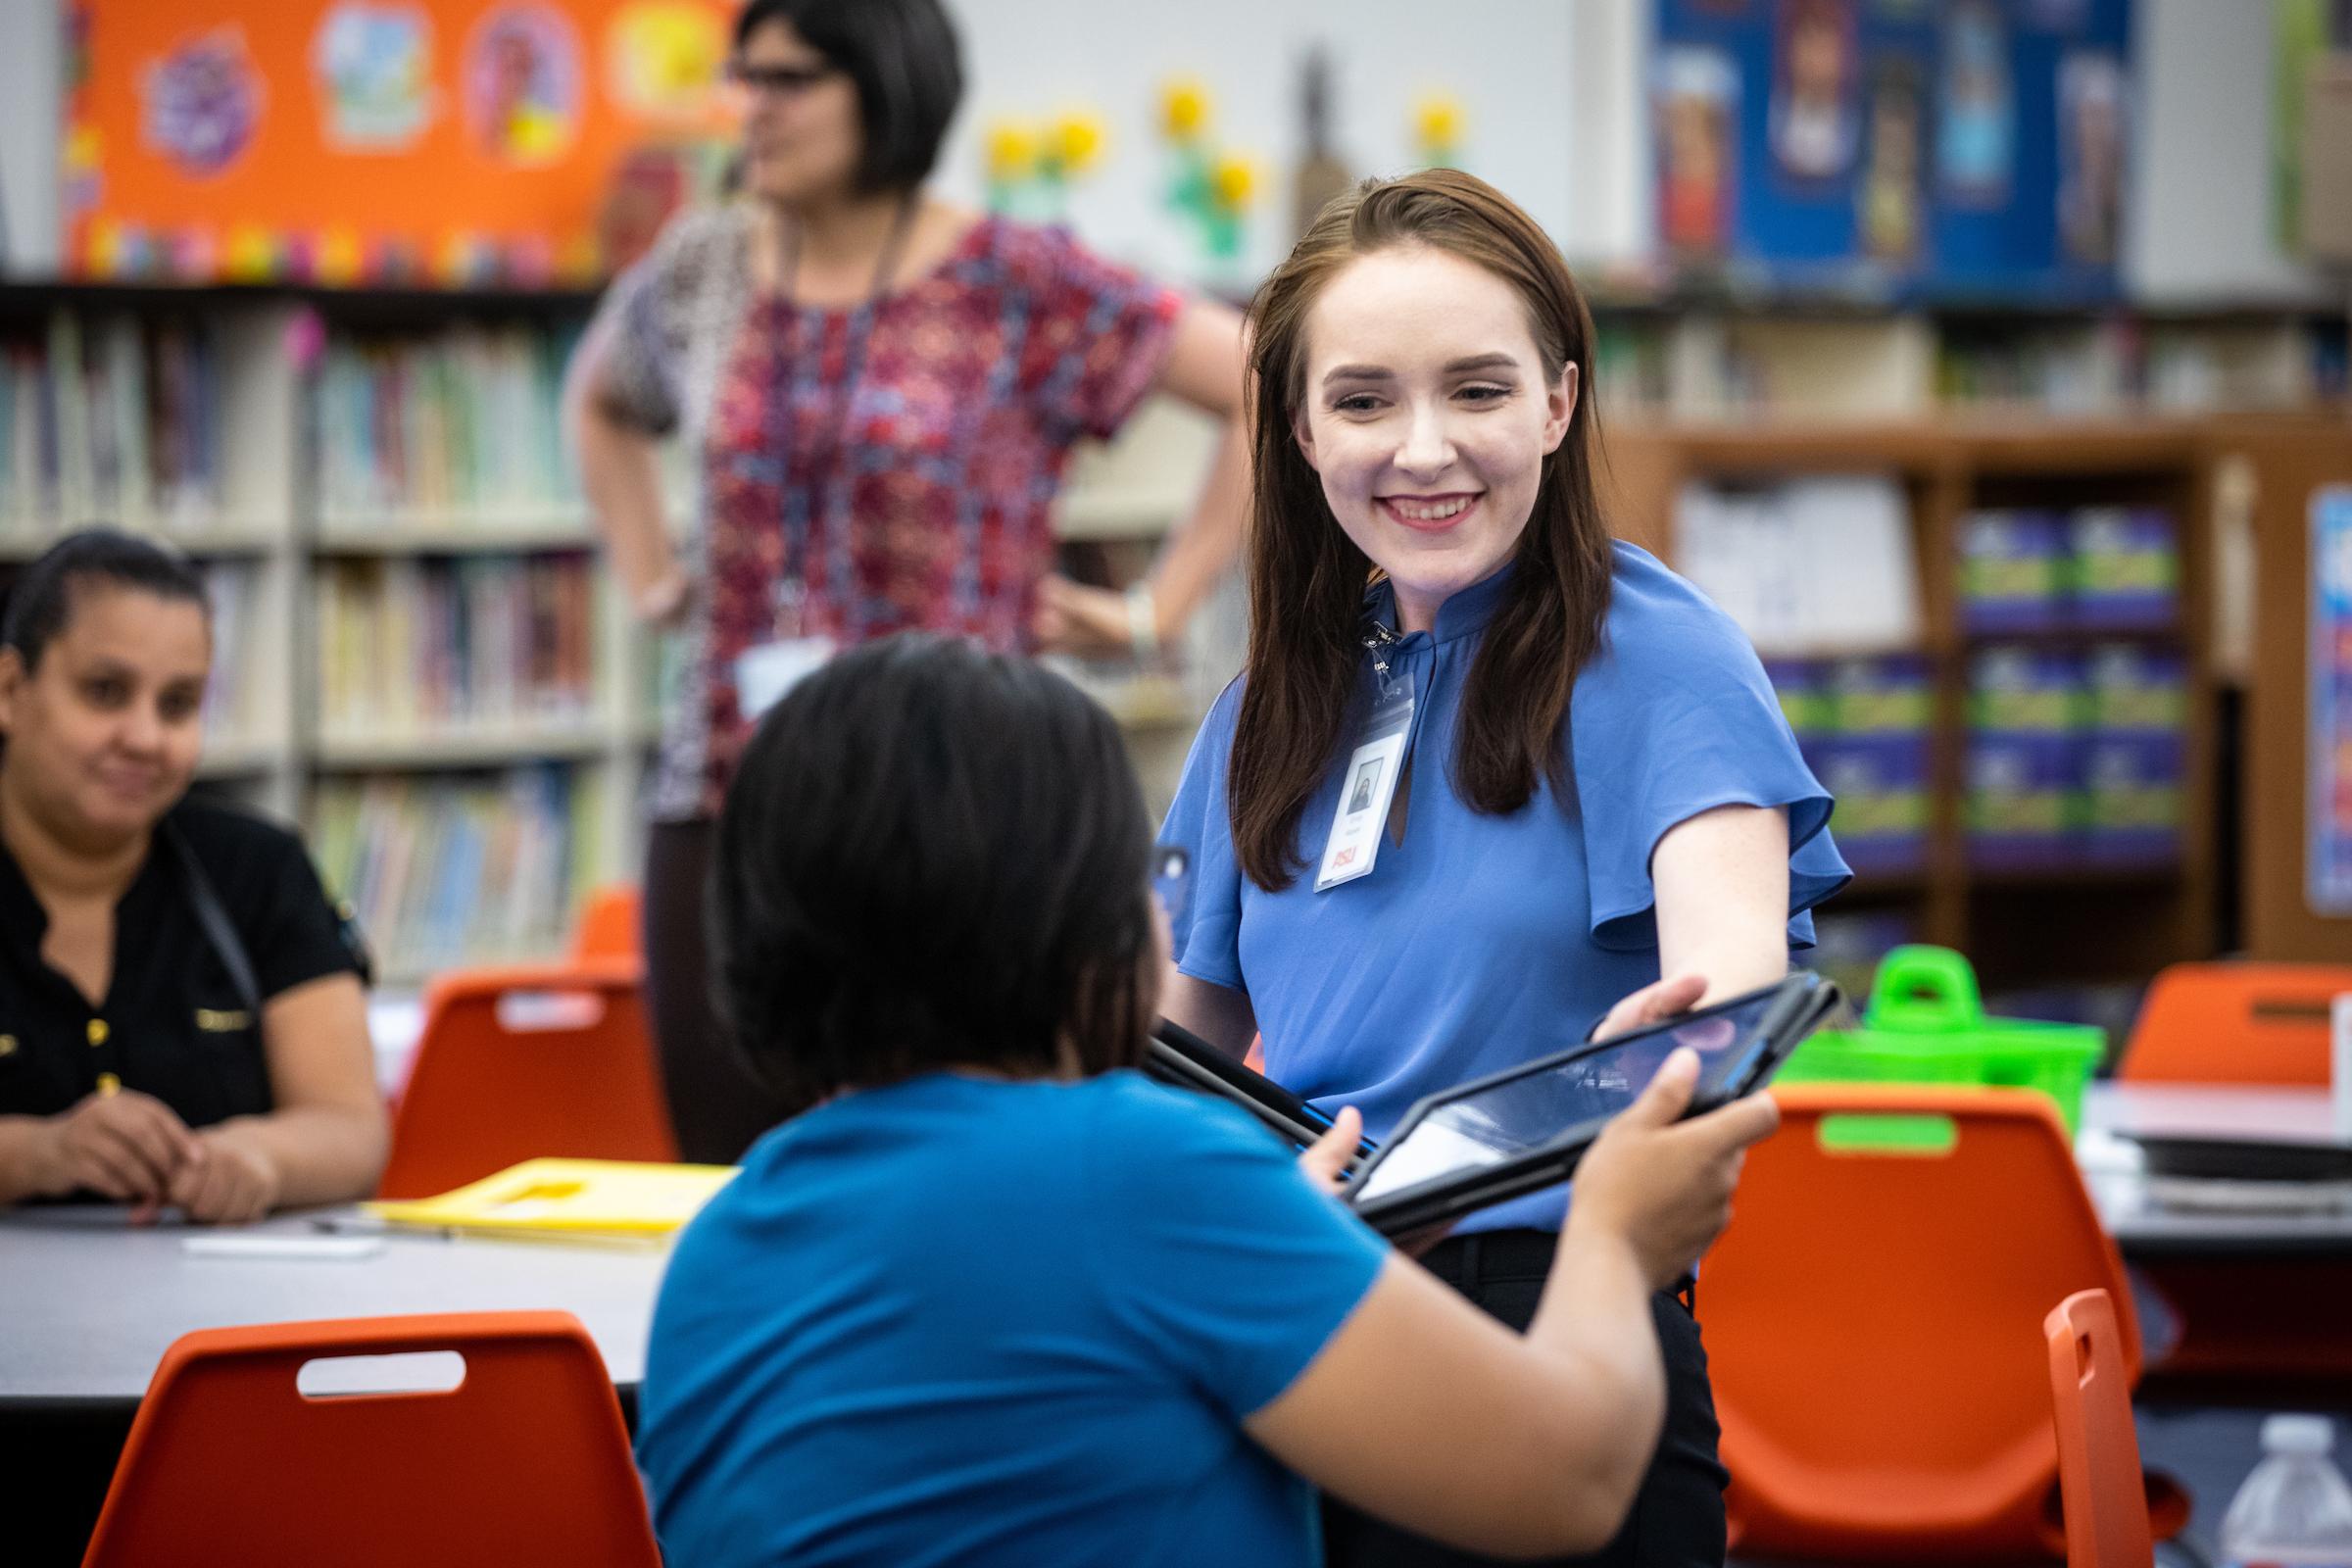 woman smiling as she hands a tablet to another woman in a library setting